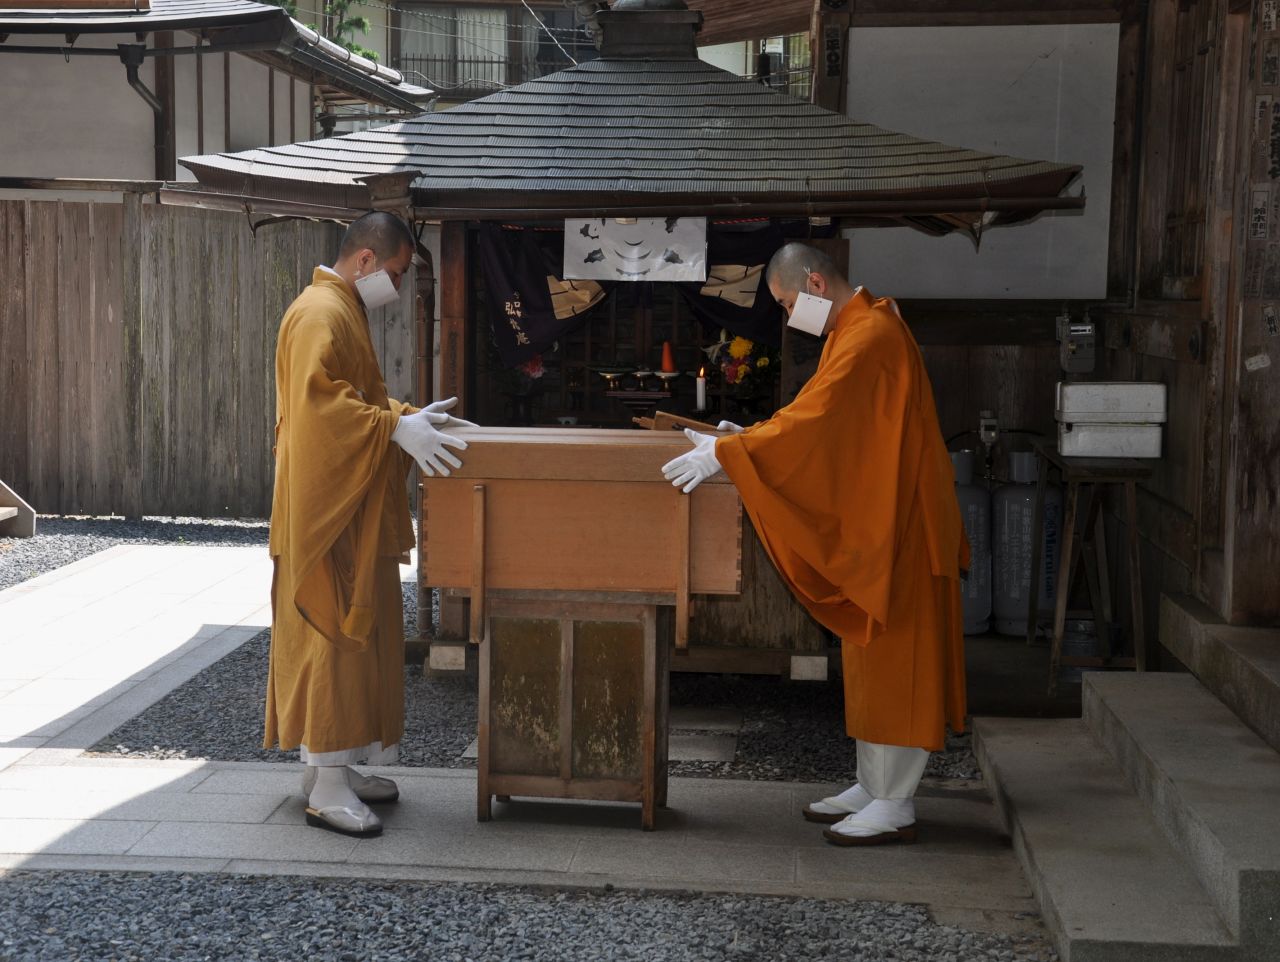 Each morning at 6:30 and 10:30 a.m. at this small shrine, meal offerings are prepared for Kobo Daishi Kukai, placed in a covered box and carried up to his mausoleum by masked monks. 